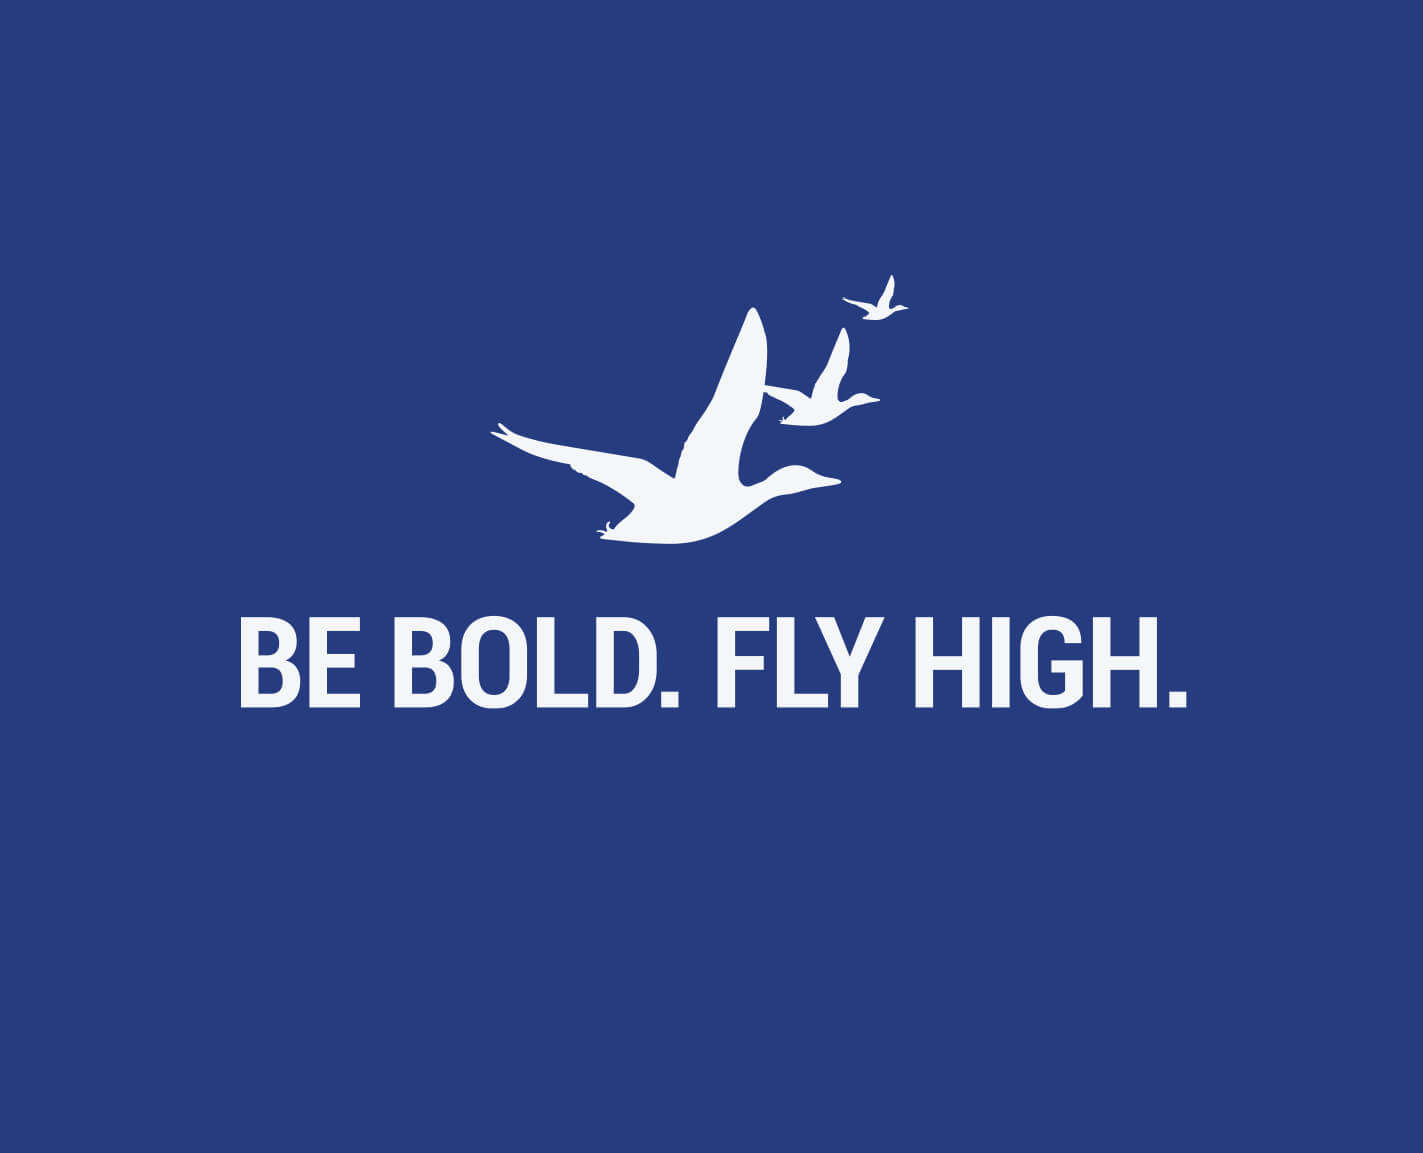 One of many Be Bold. Fly High. logo lockups. Copyright 2024 College of the Mainland.